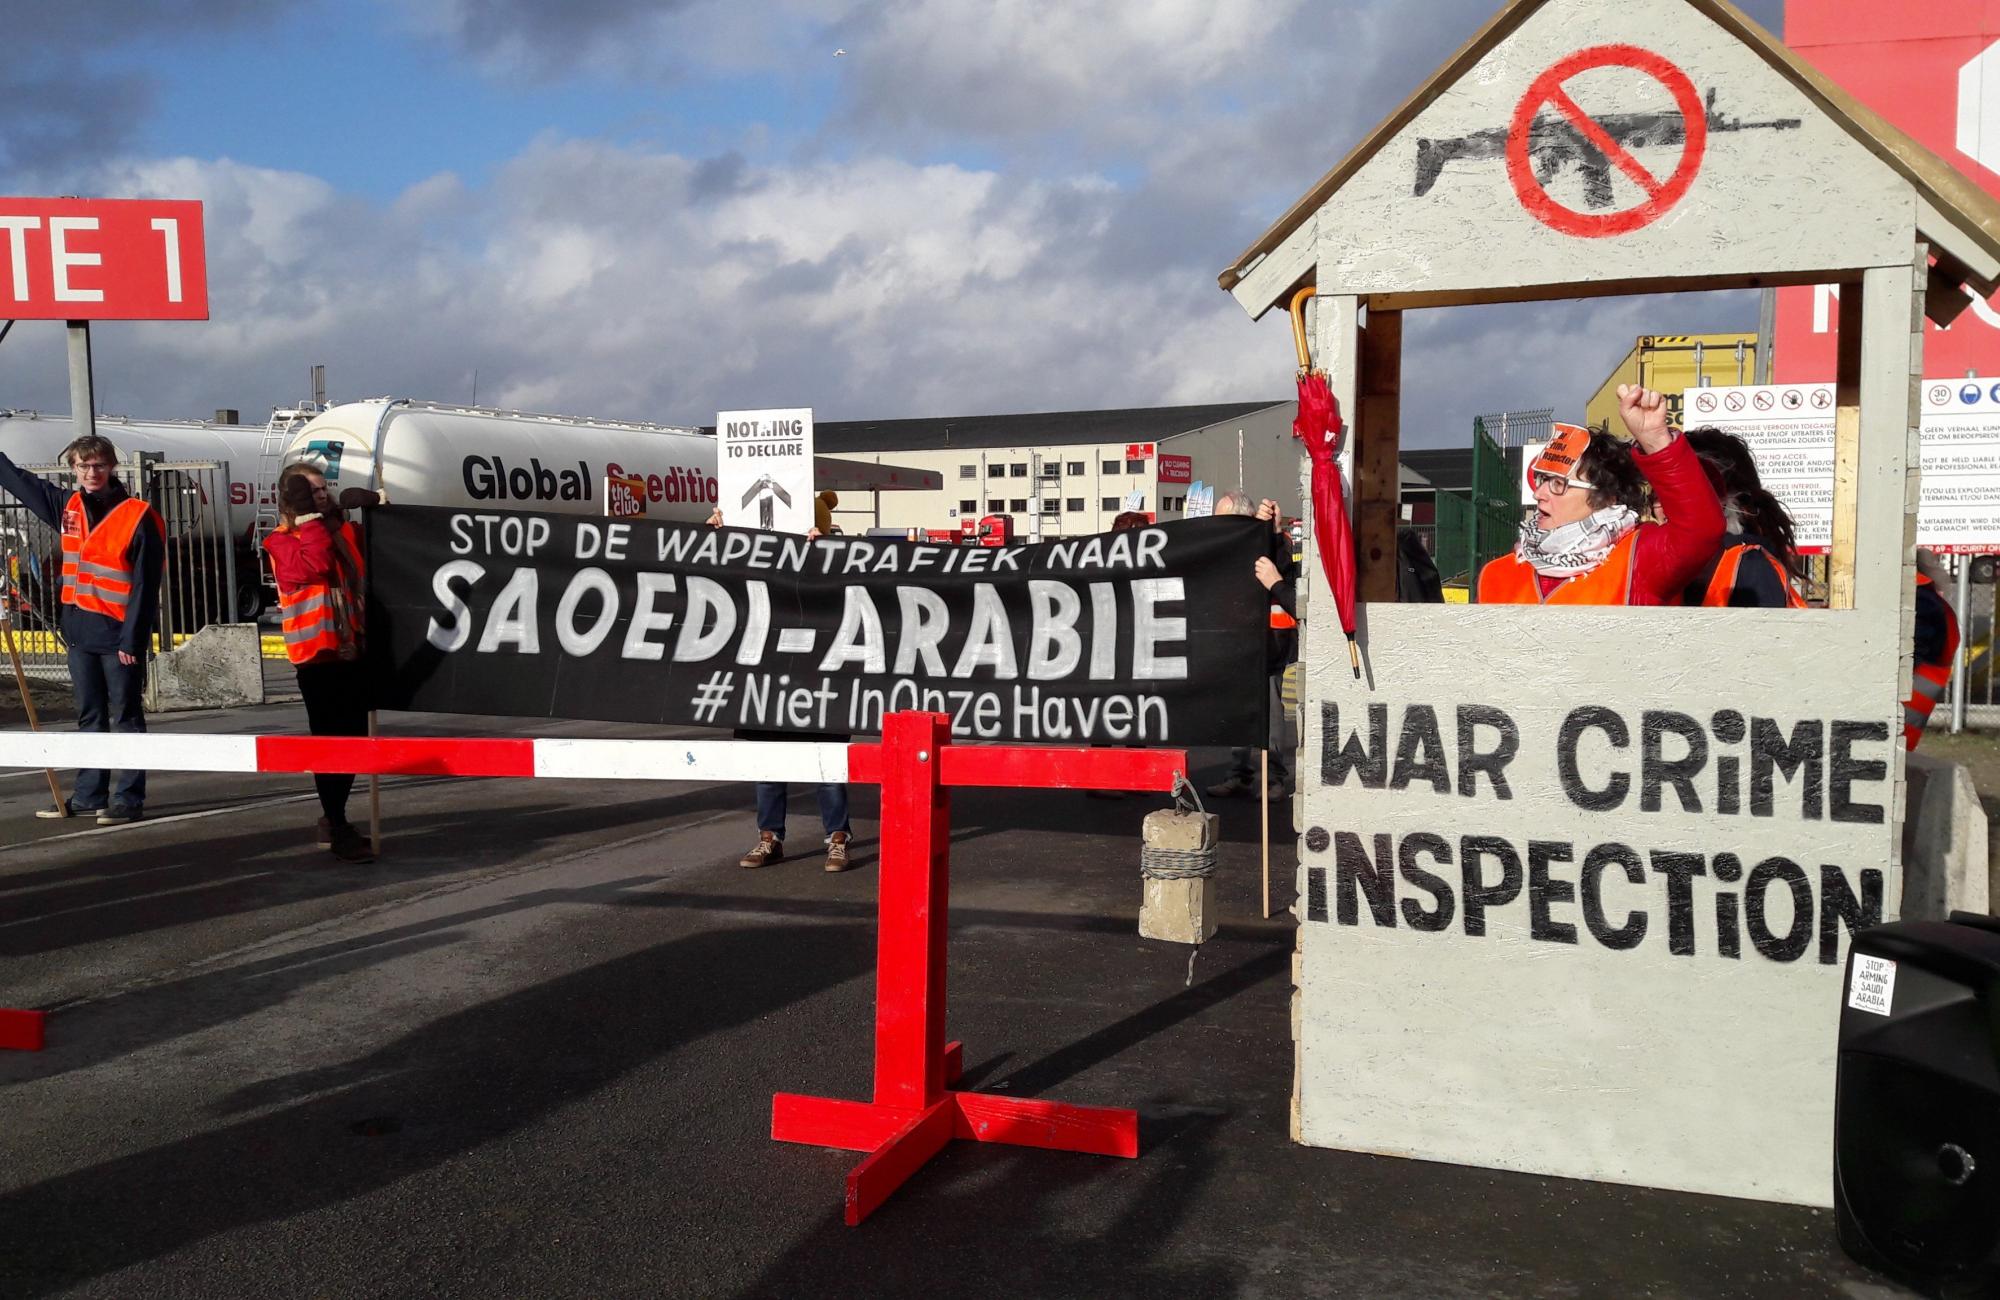 Action at the port of Antwerp - banner says stop arming saudi in Dutch